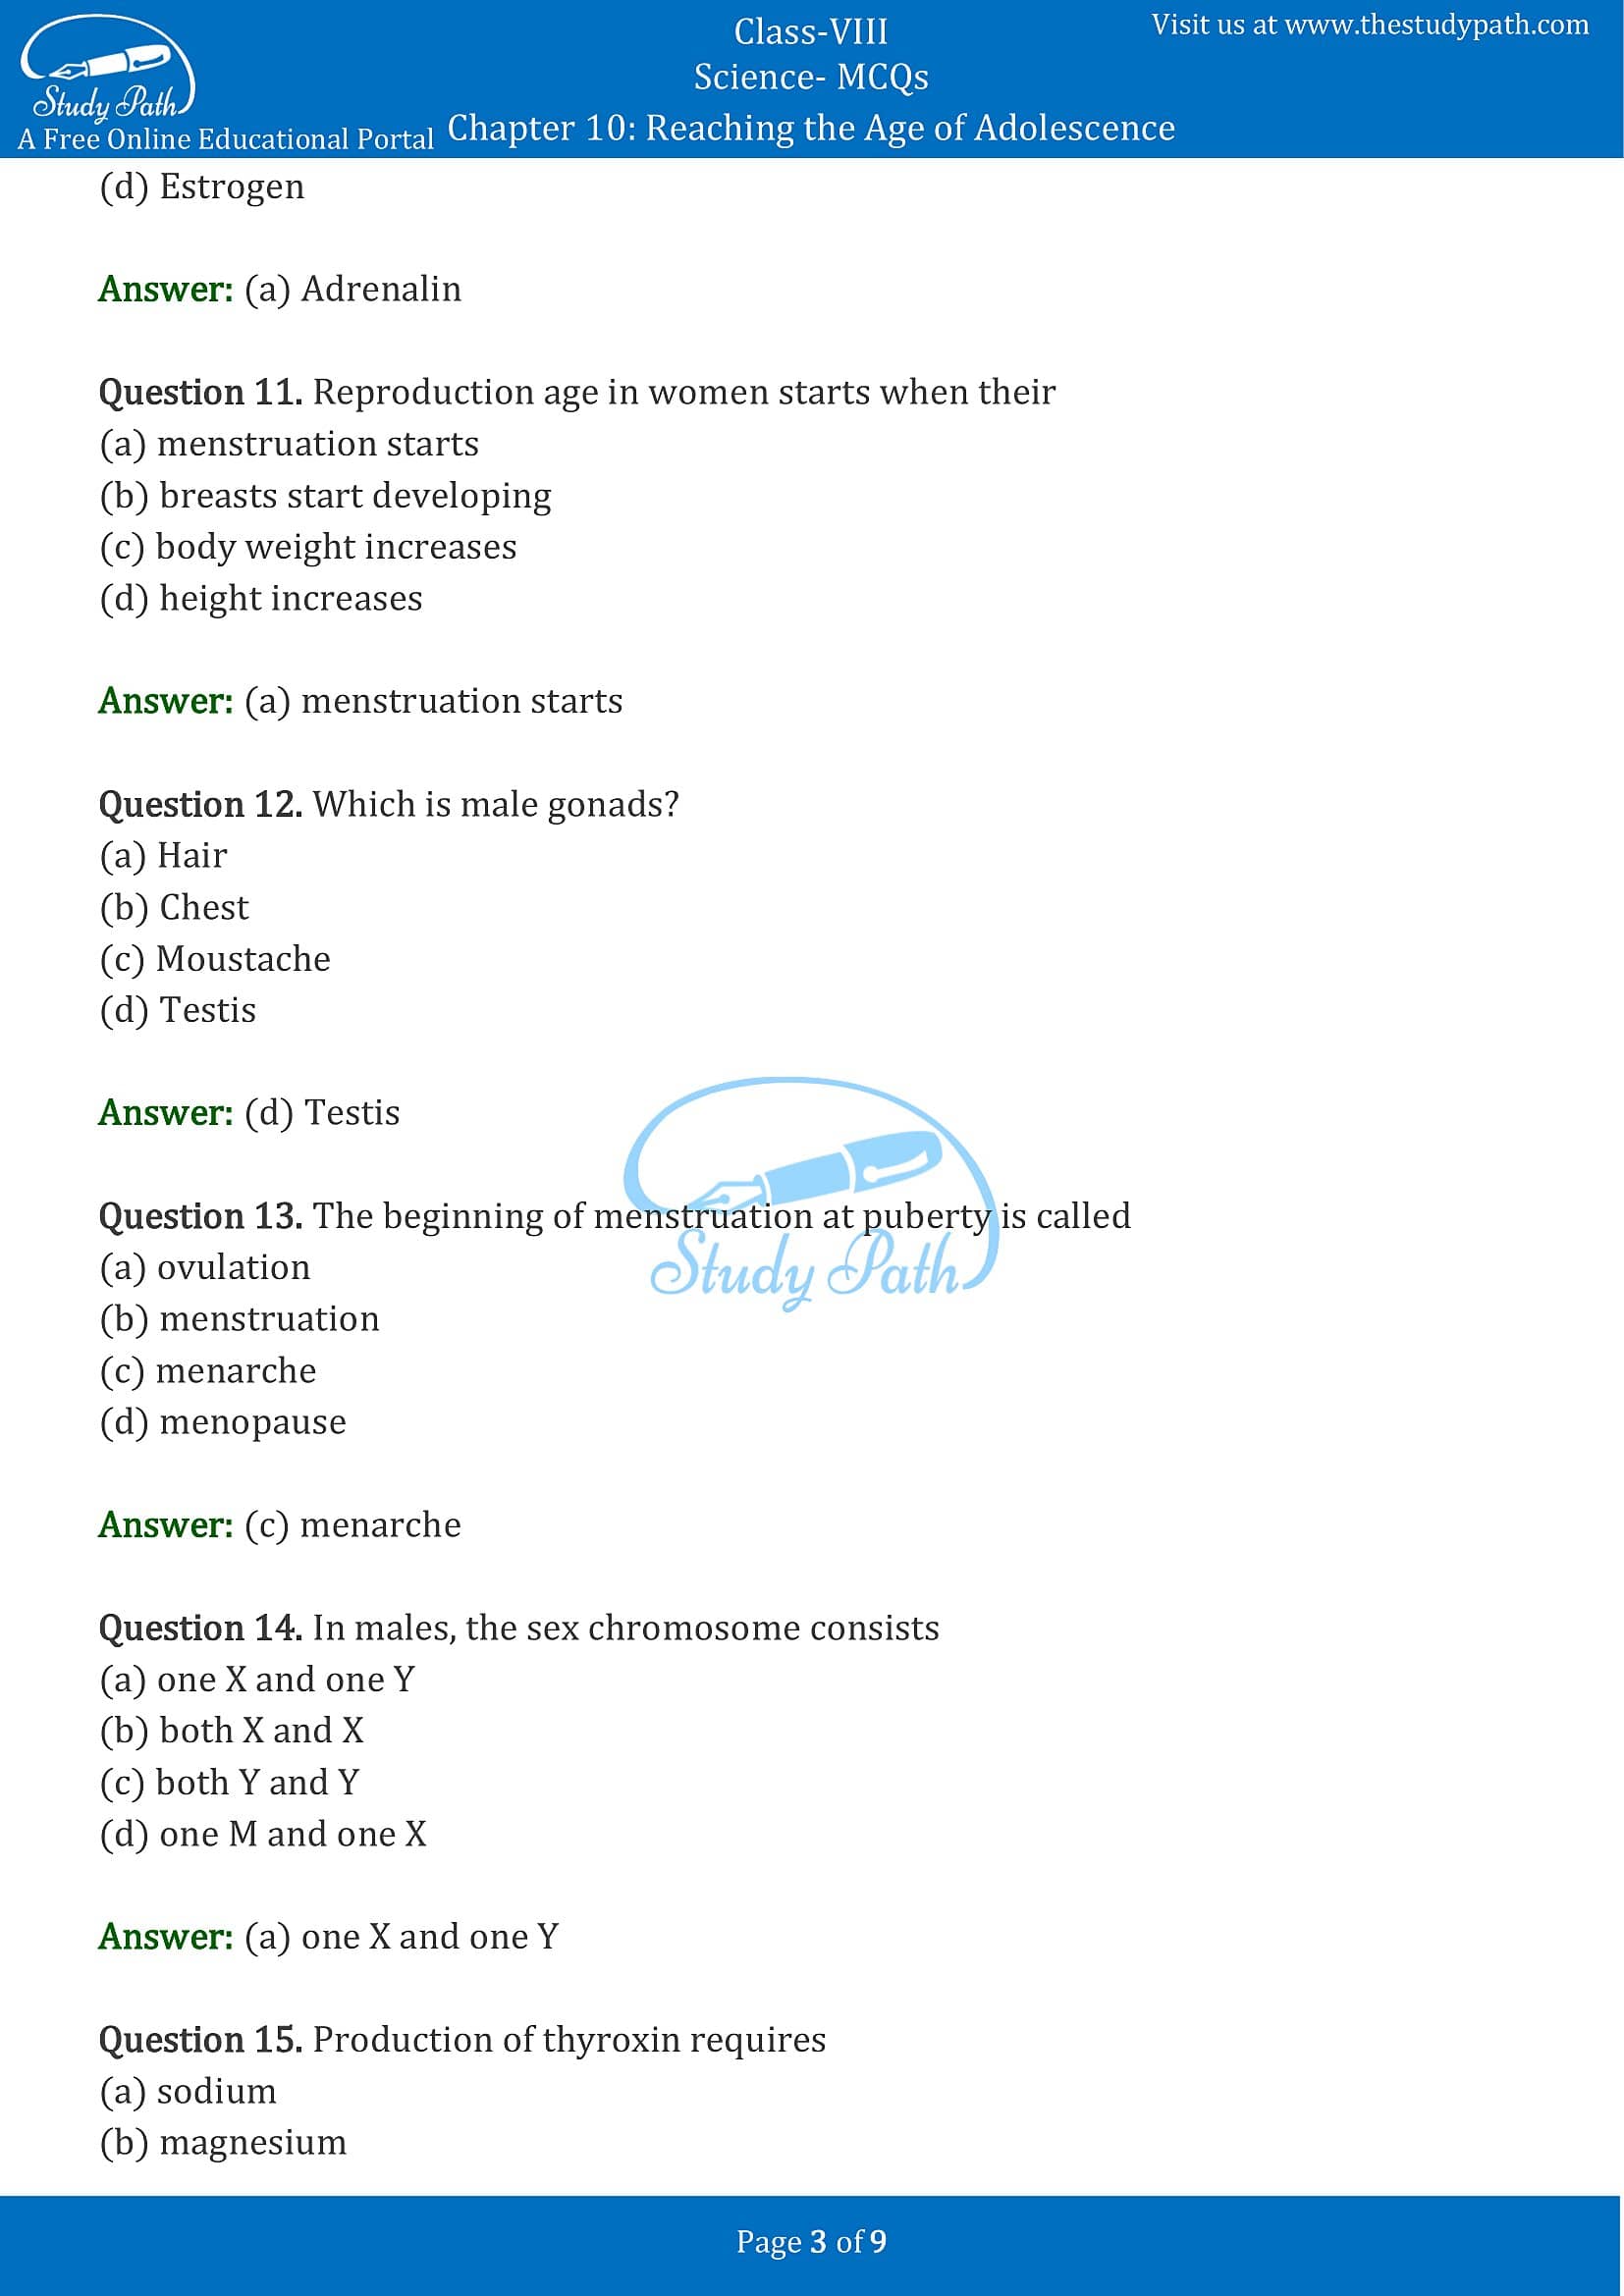 MCQ Questions for Class 8 Science Chapter 10 Reaching the Age of Adolescence with Answers PDF -3